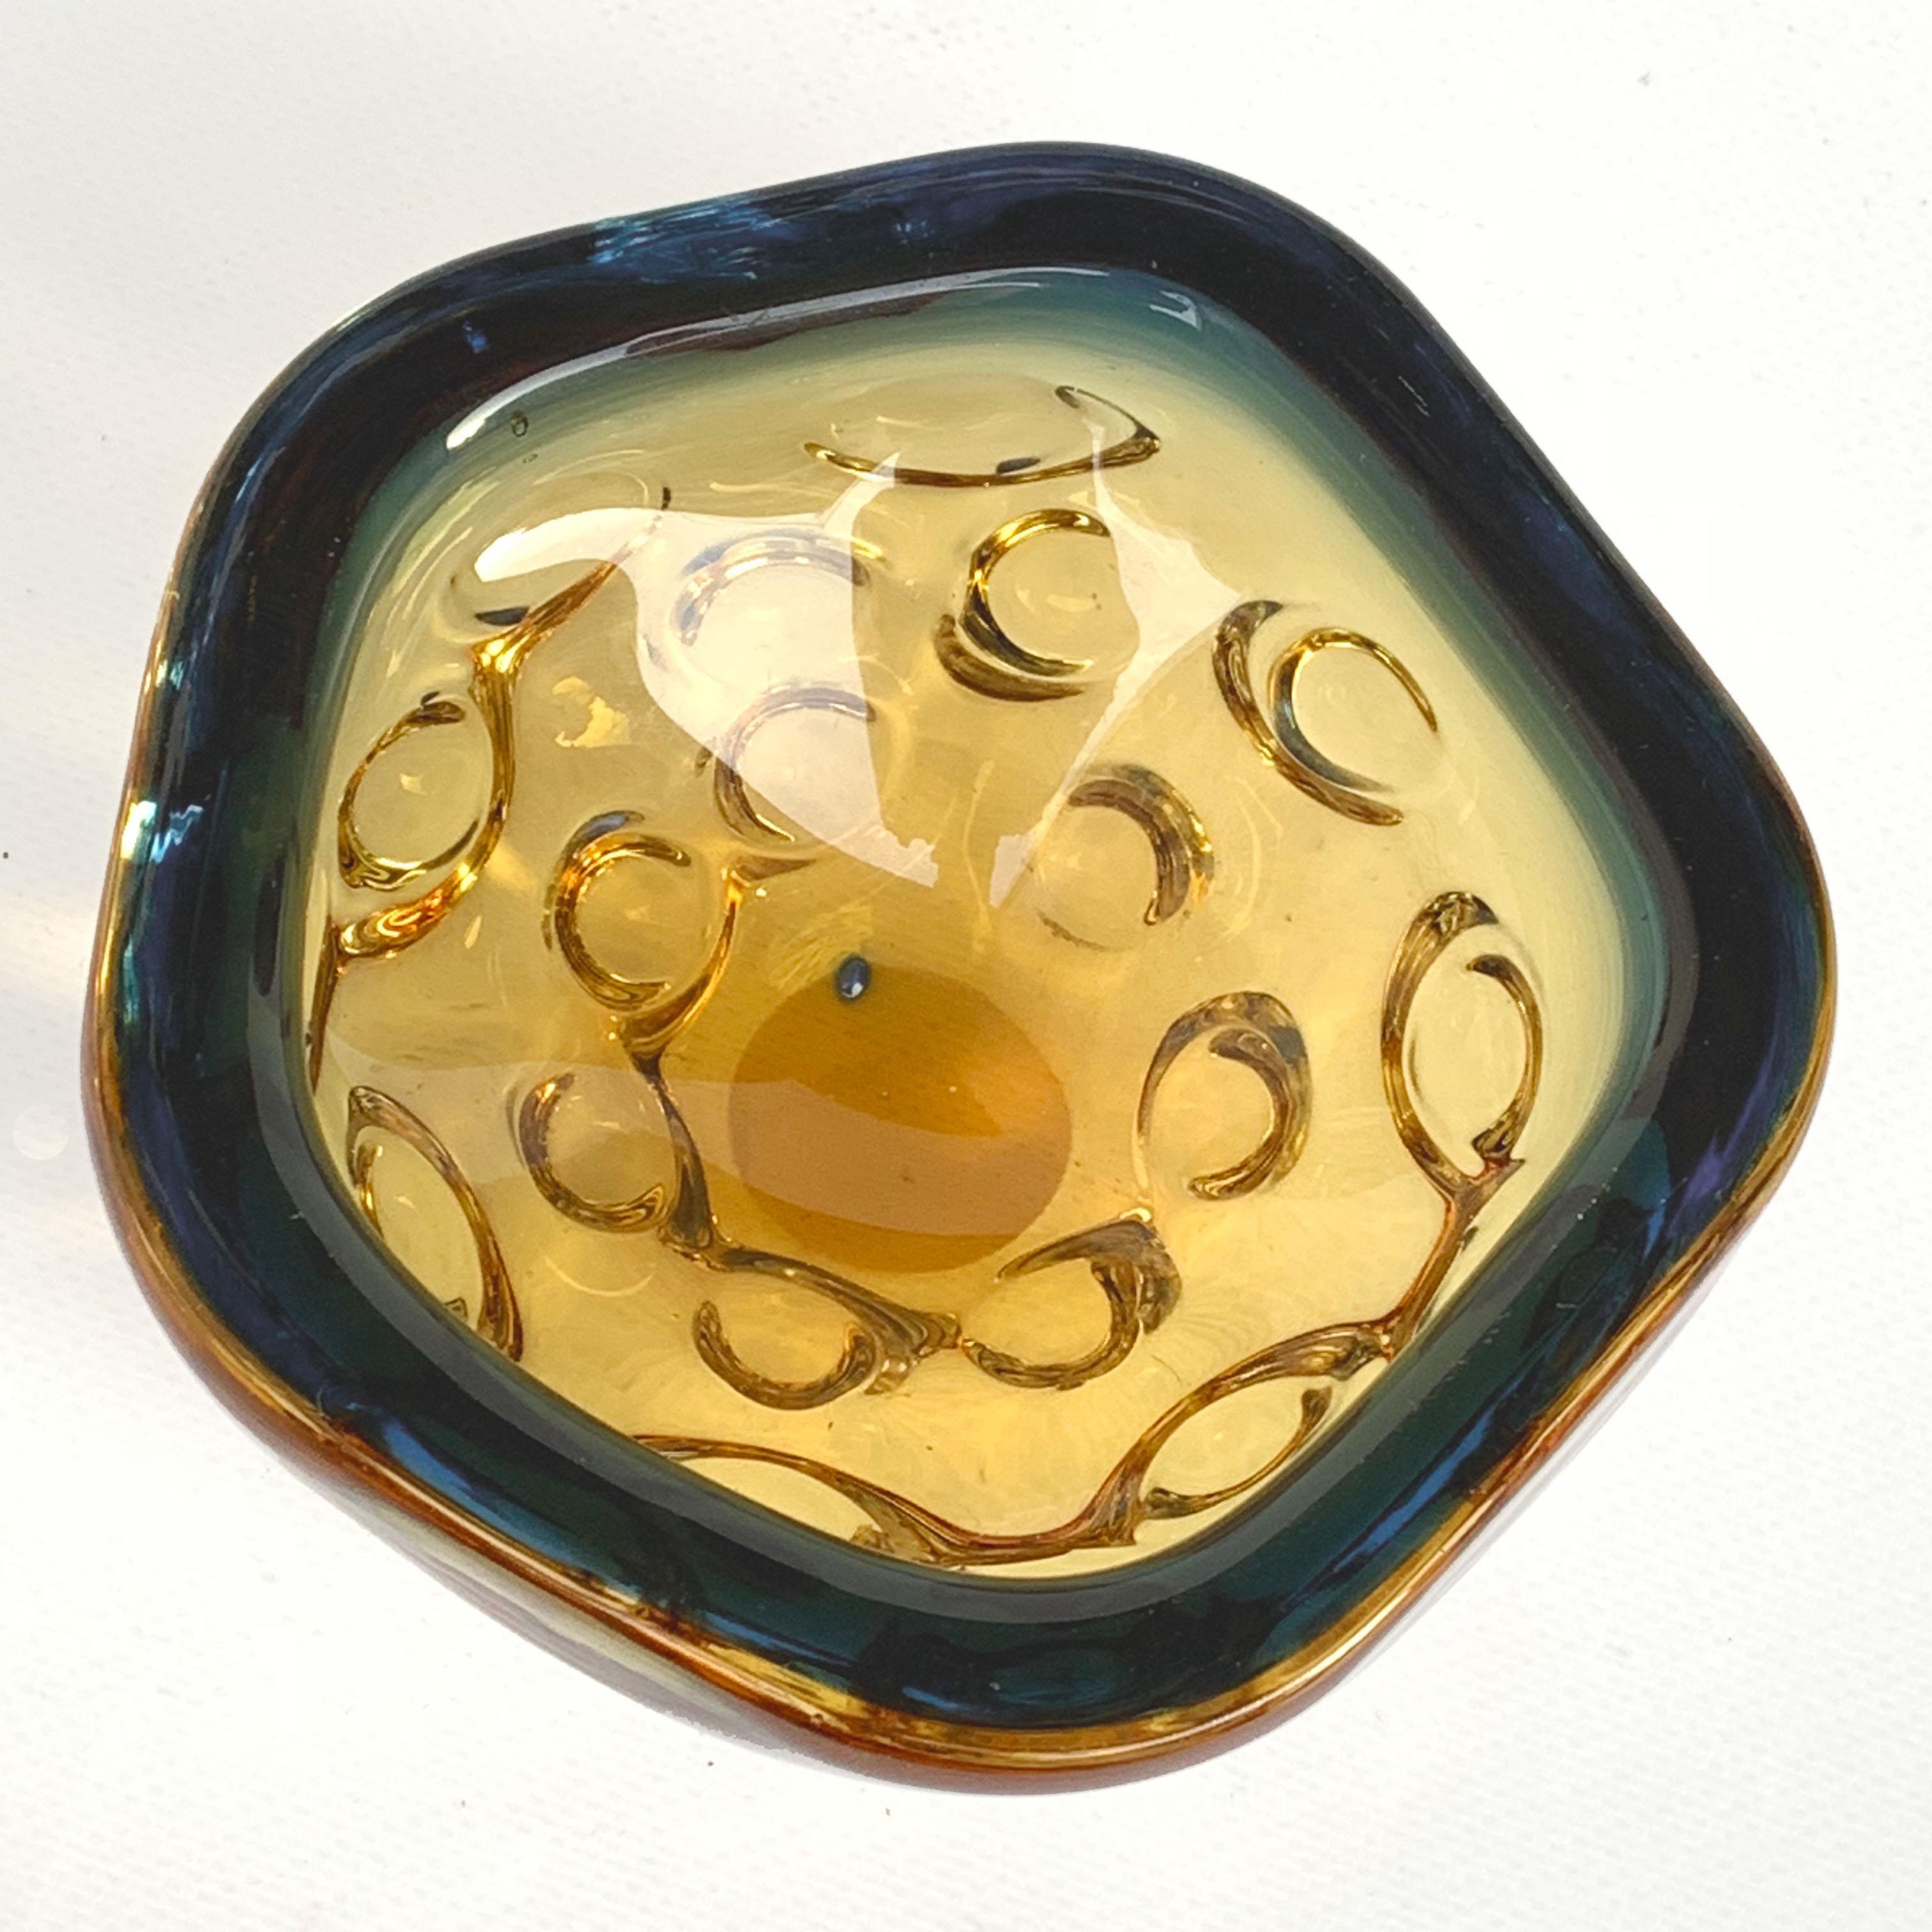 20th Century Blue and Amber Glass Bowl or Ashtray, Murano Glass Sculpture, Italy, 1960s